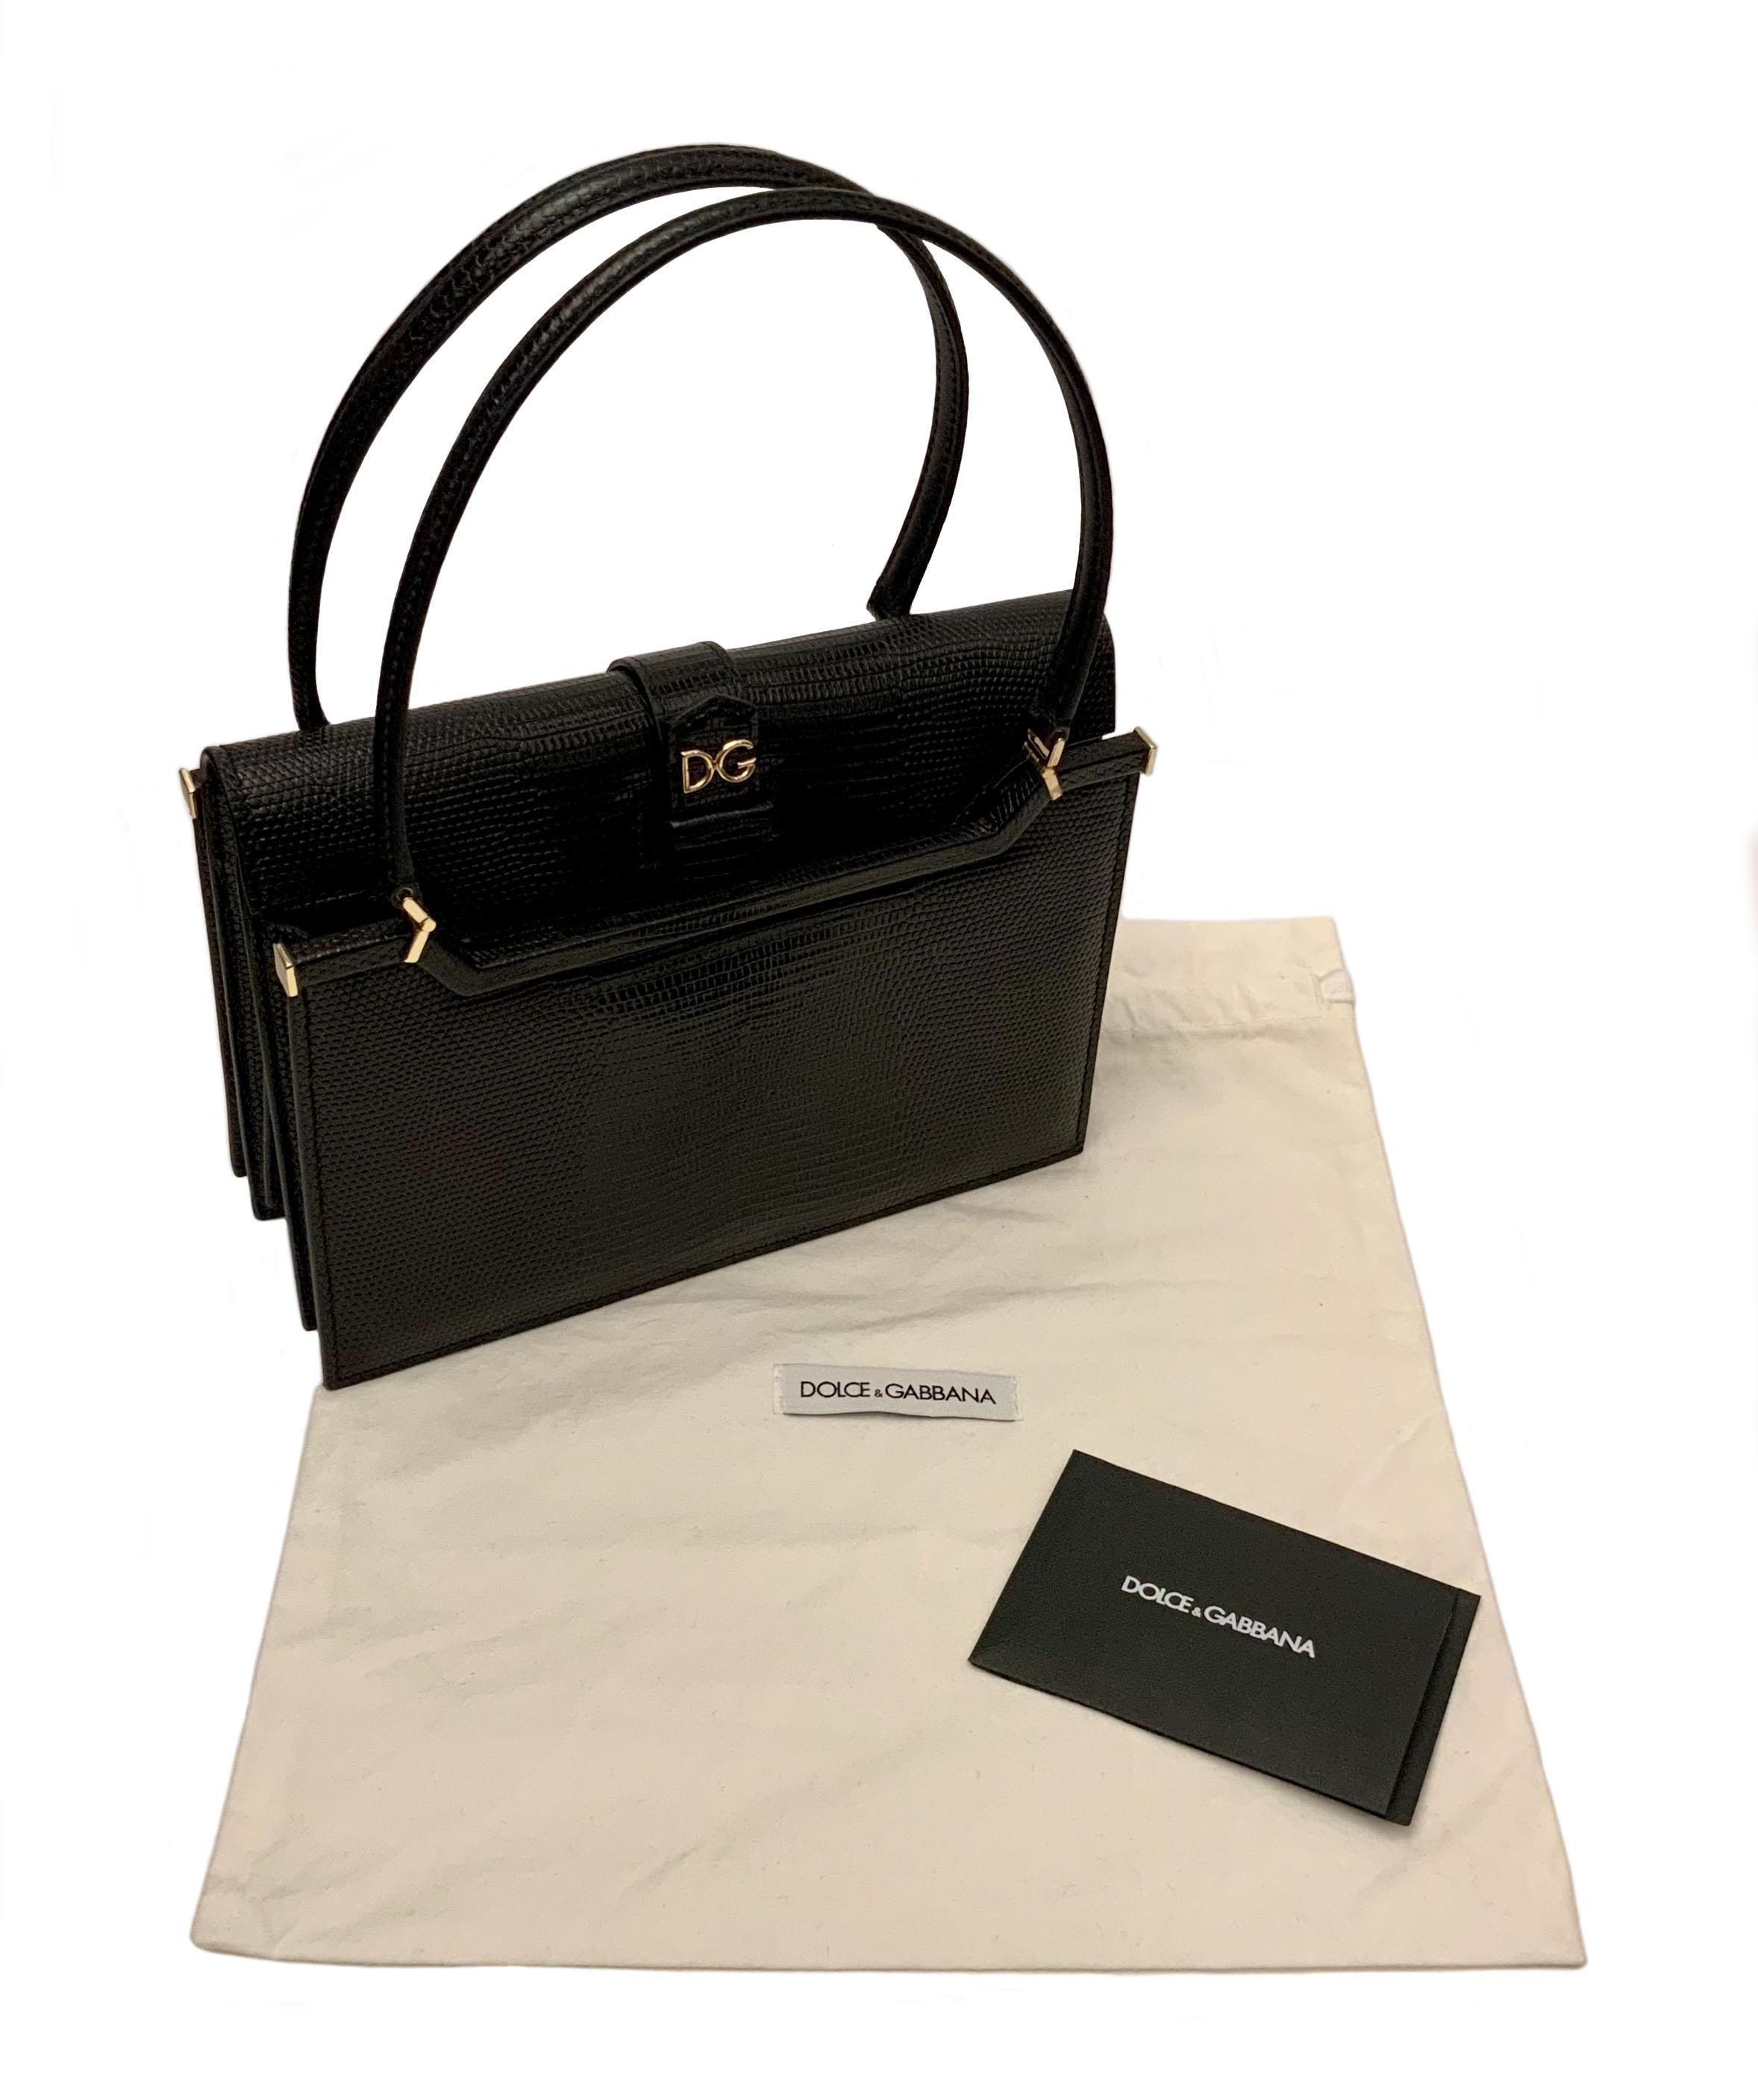 This pre-owned but new small handbag is from the Ingrid line from the house of Dolce & Gabbana.
It has a vintage look that reflects the standards of timeless and is definitively 